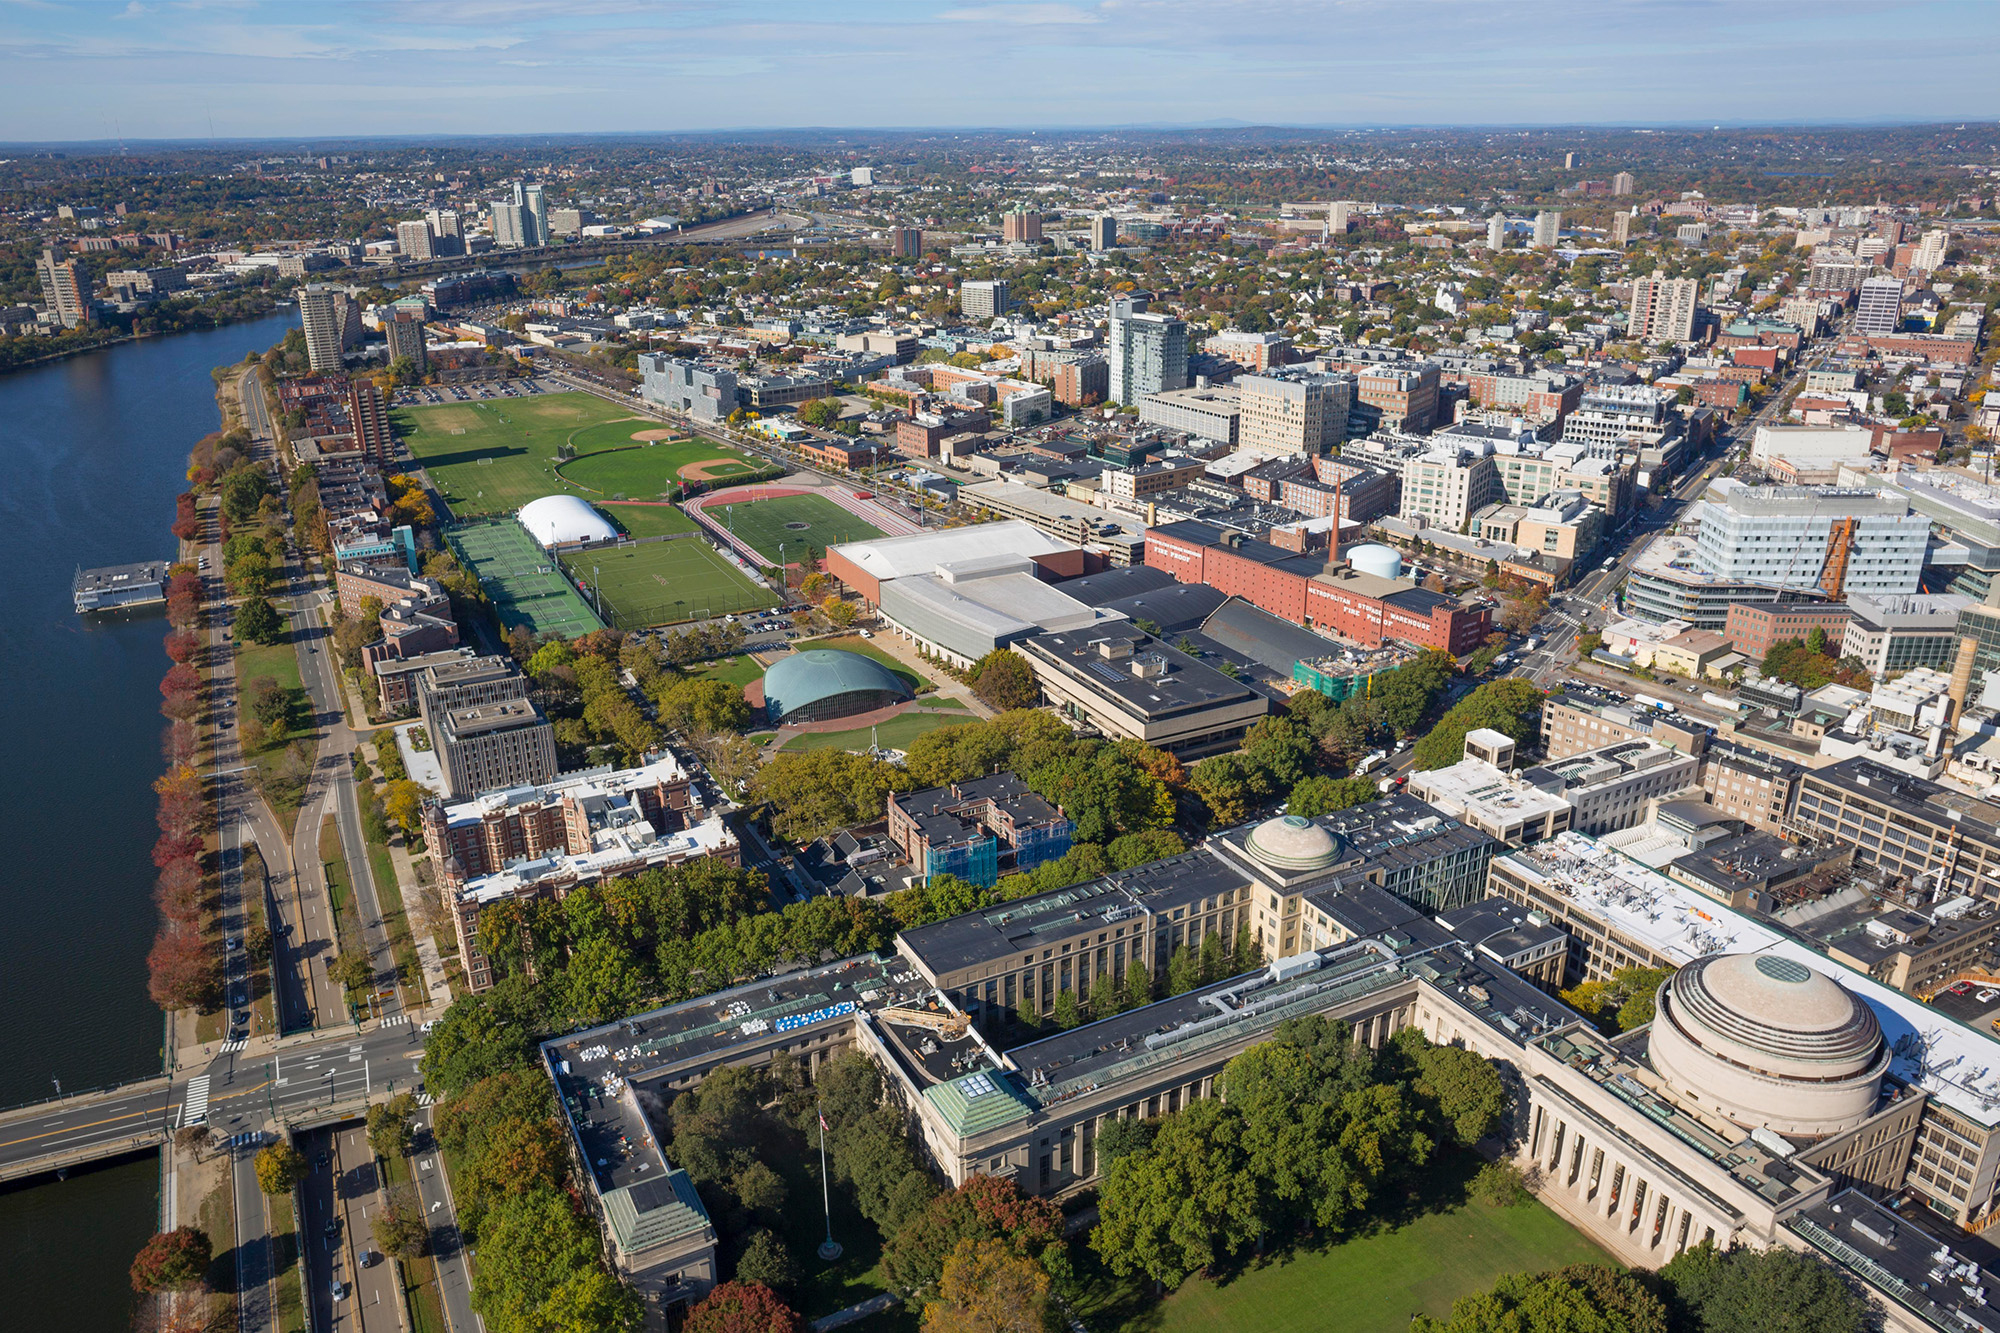 The MIT Morningside Academy for Design will be housed in the School of Architecture and Planning (SA+P). The Metropolitan Warehouse, large brick building at center right, is undergoing renovation and will be the new home of the Department of Architecture and other units of SA+P.